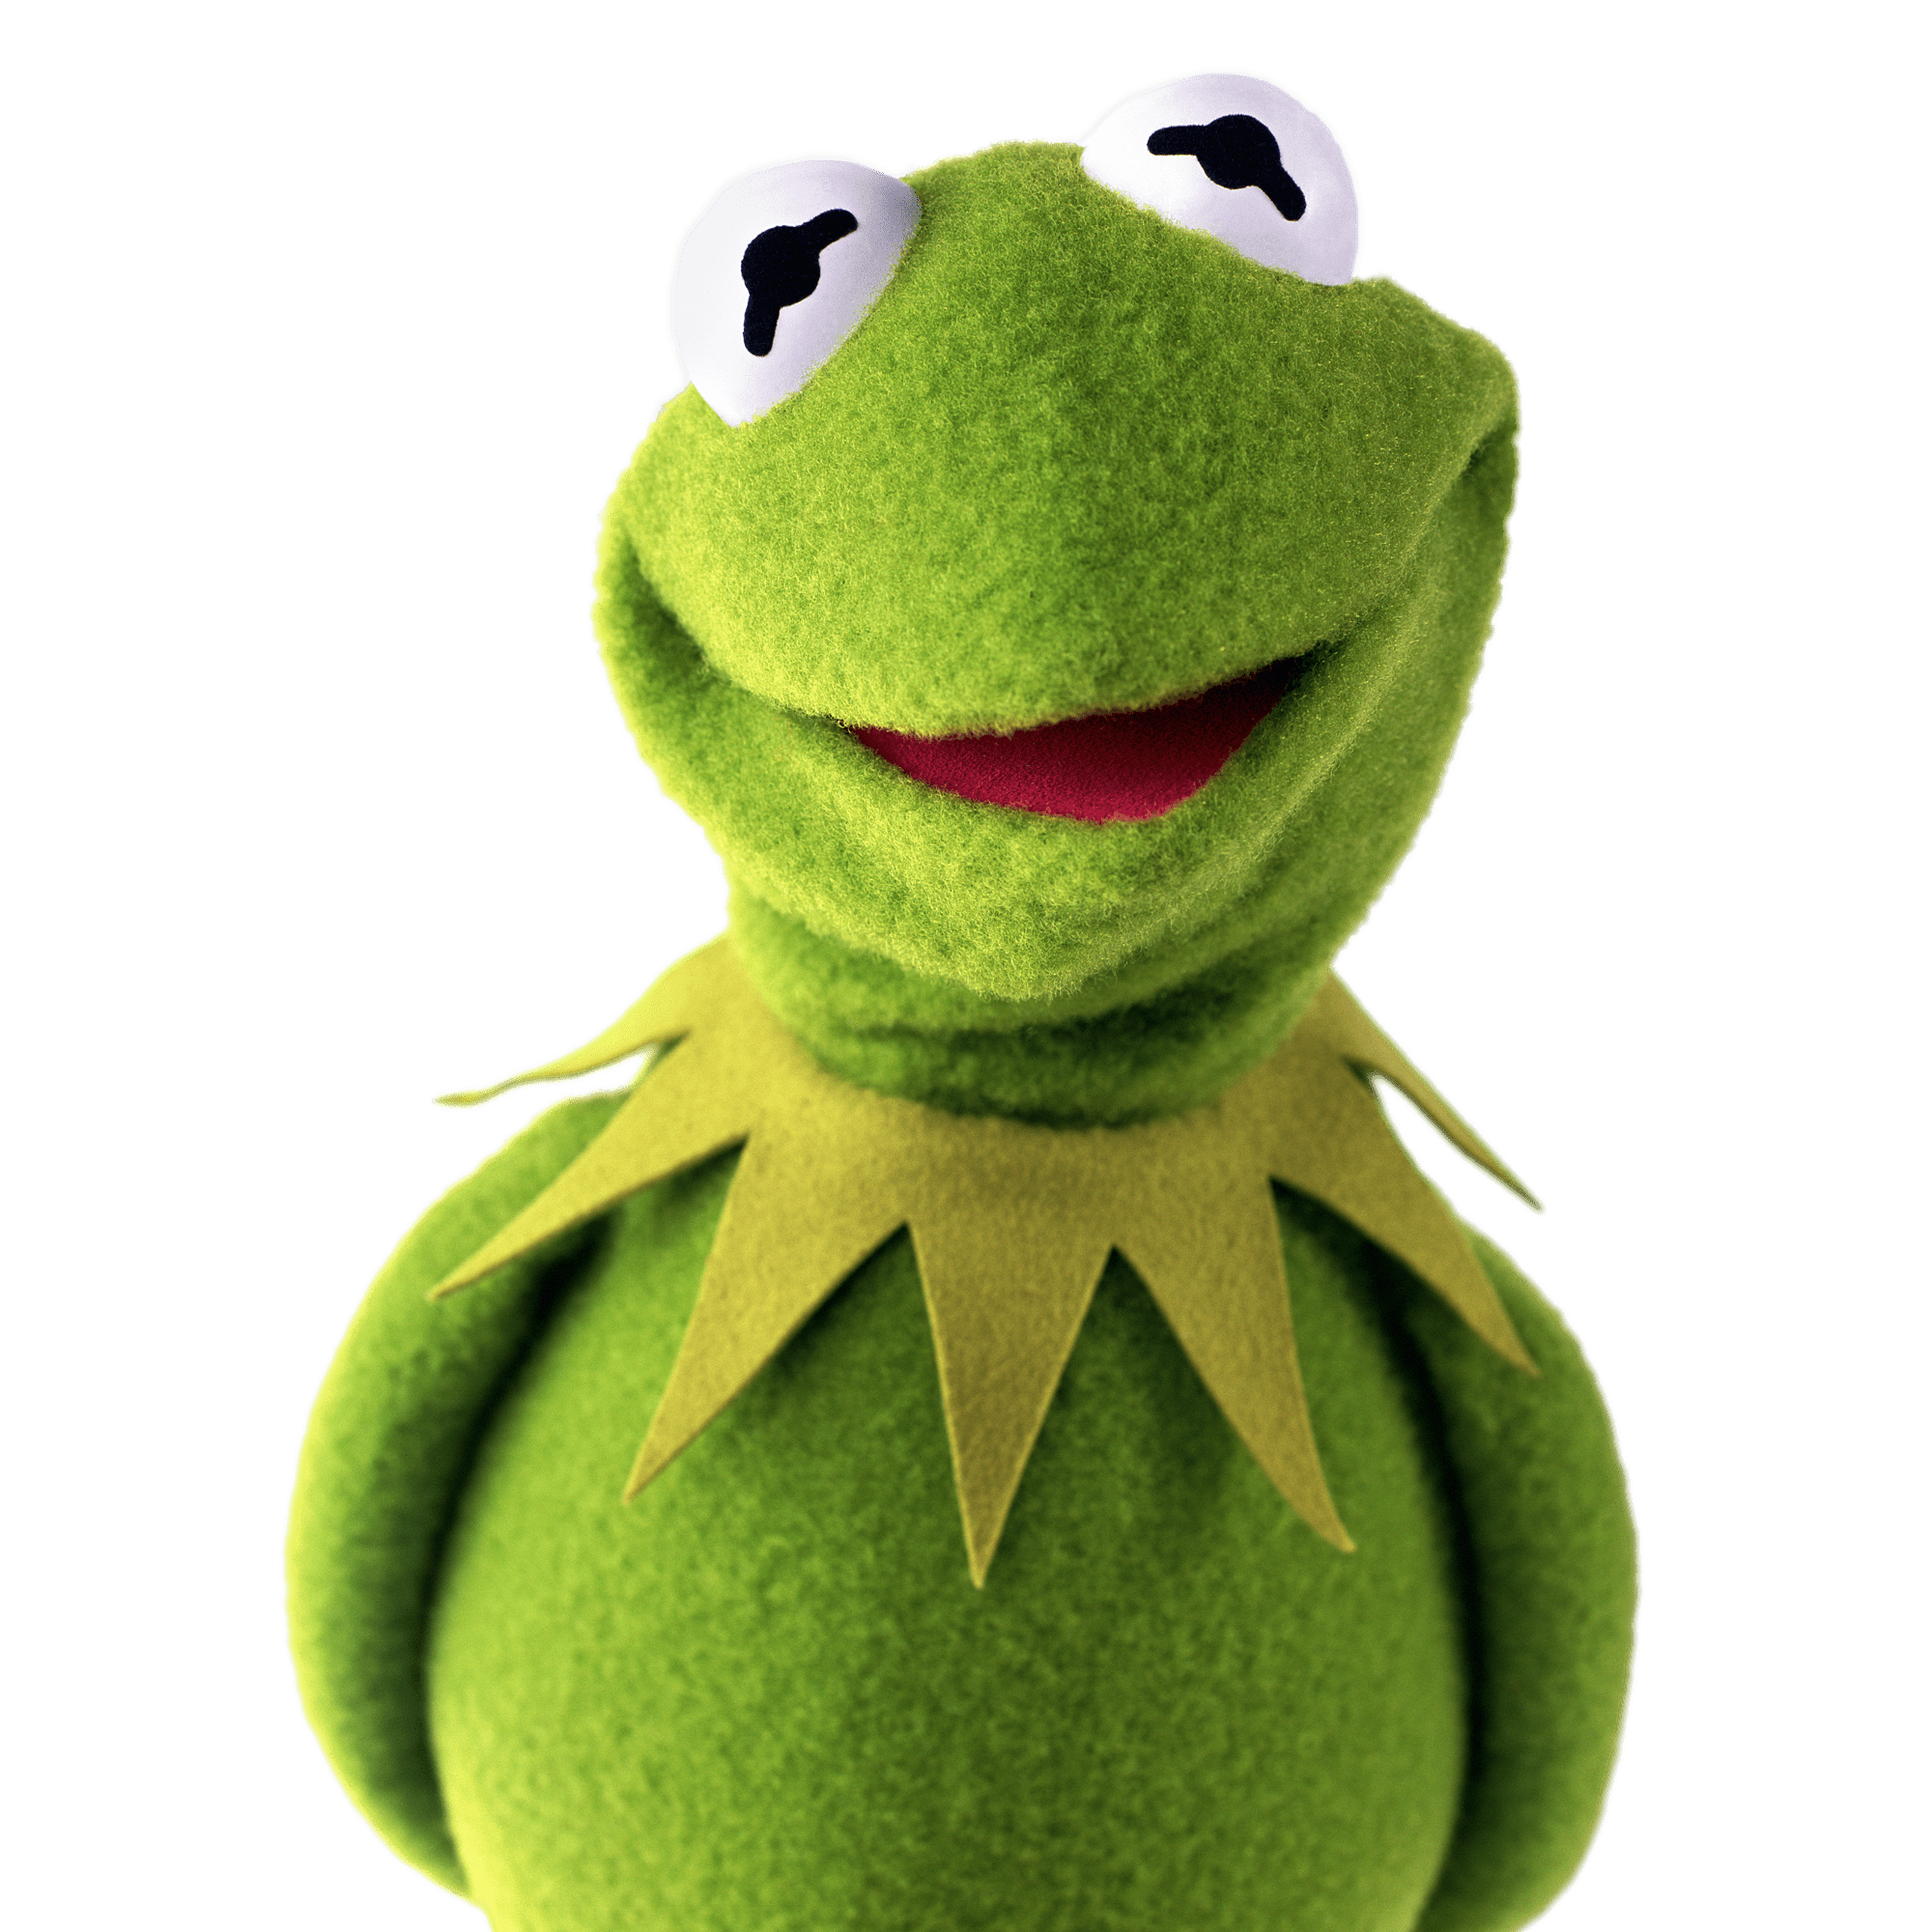 Kermit Png Kermit Kermit The Frog Meme Png 651527 Vippng Images and